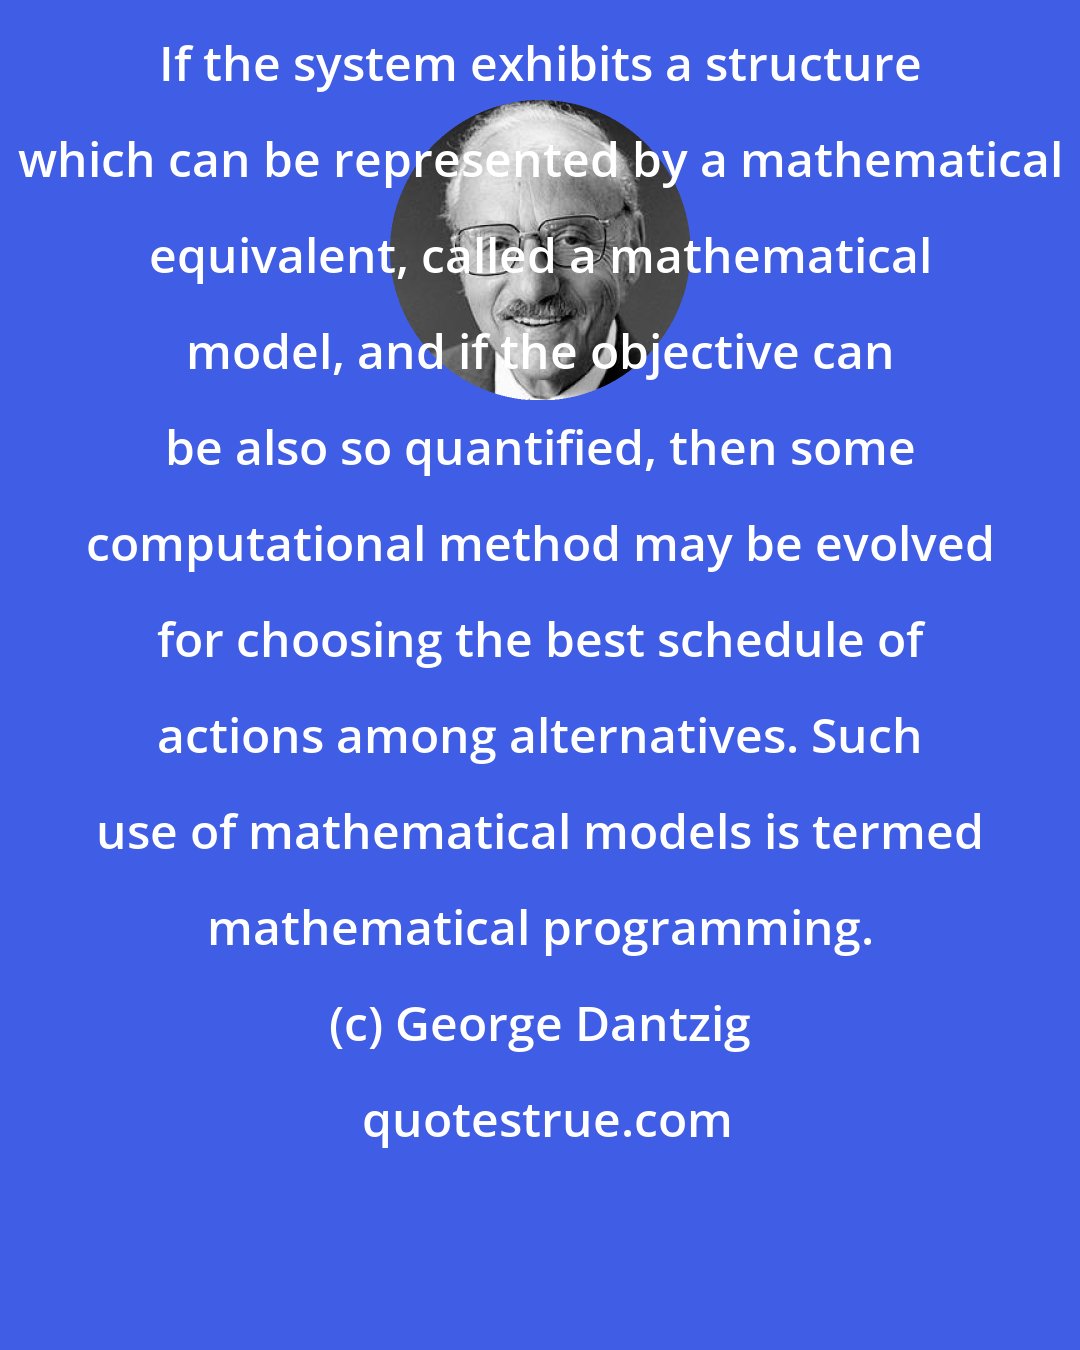 George Dantzig: If the system exhibits a structure which can be represented by a mathematical equivalent, called a mathematical model, and if the objective can be also so quantified, then some computational method may be evolved for choosing the best schedule of actions among alternatives. Such use of mathematical models is termed mathematical programming.